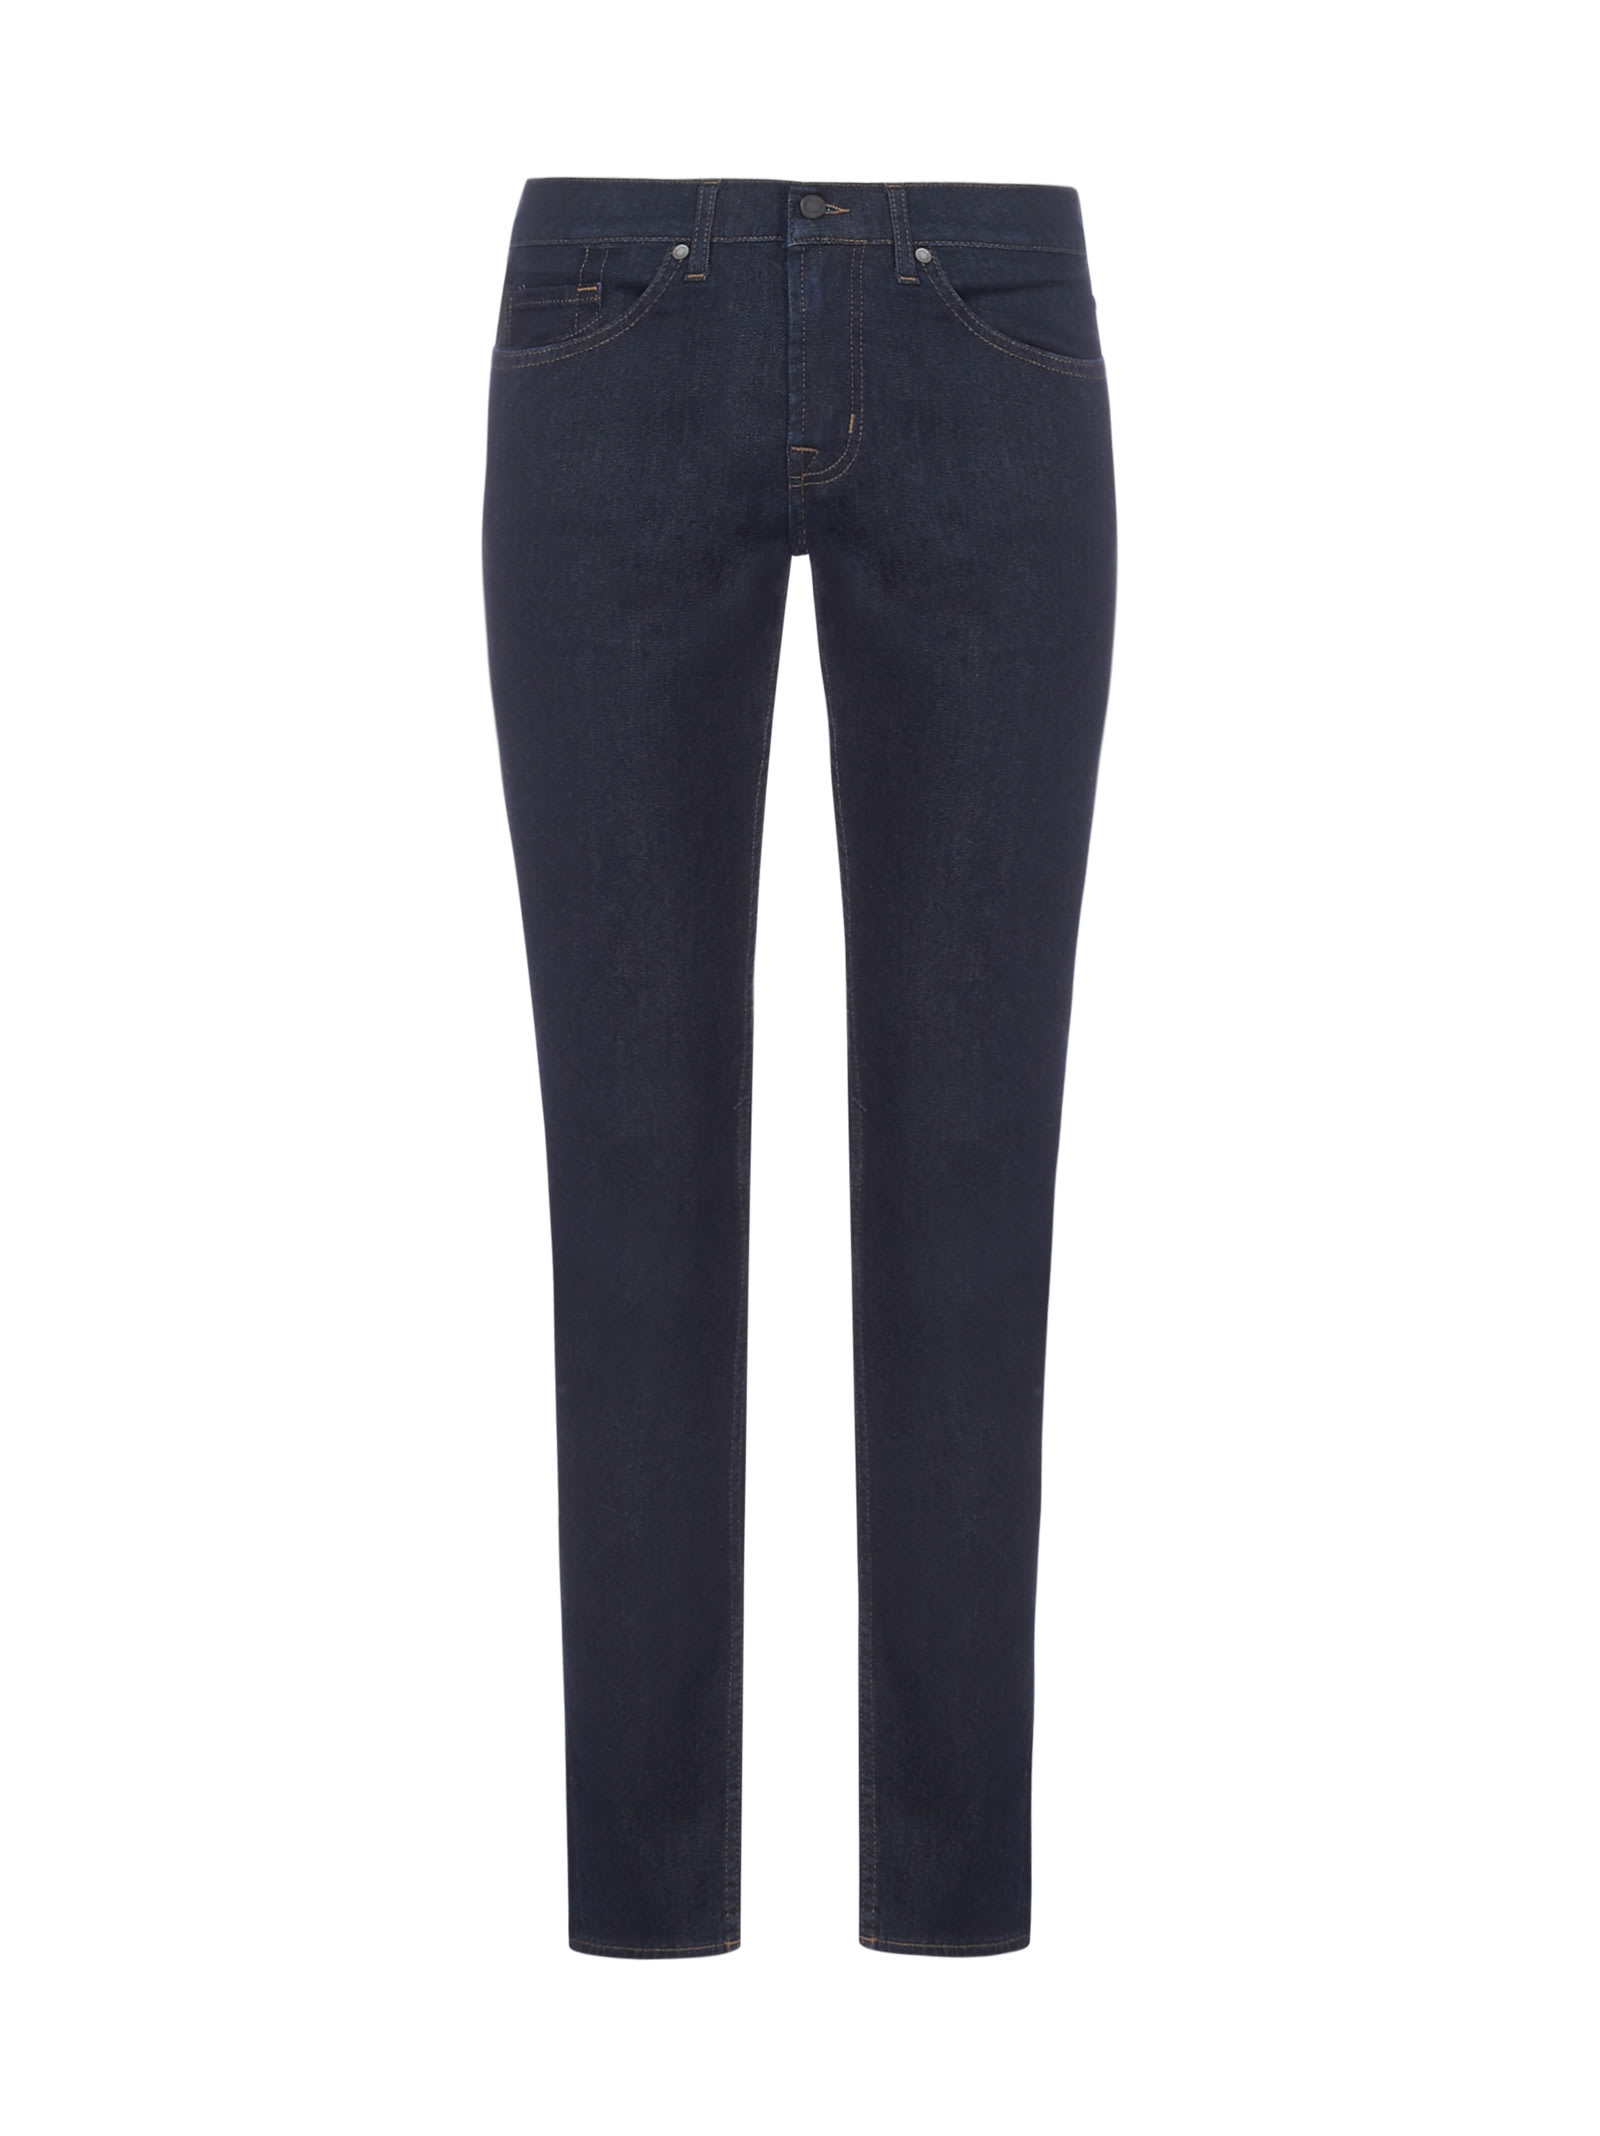 7 For All Mankind Ronnie Luxe Performance Jeans